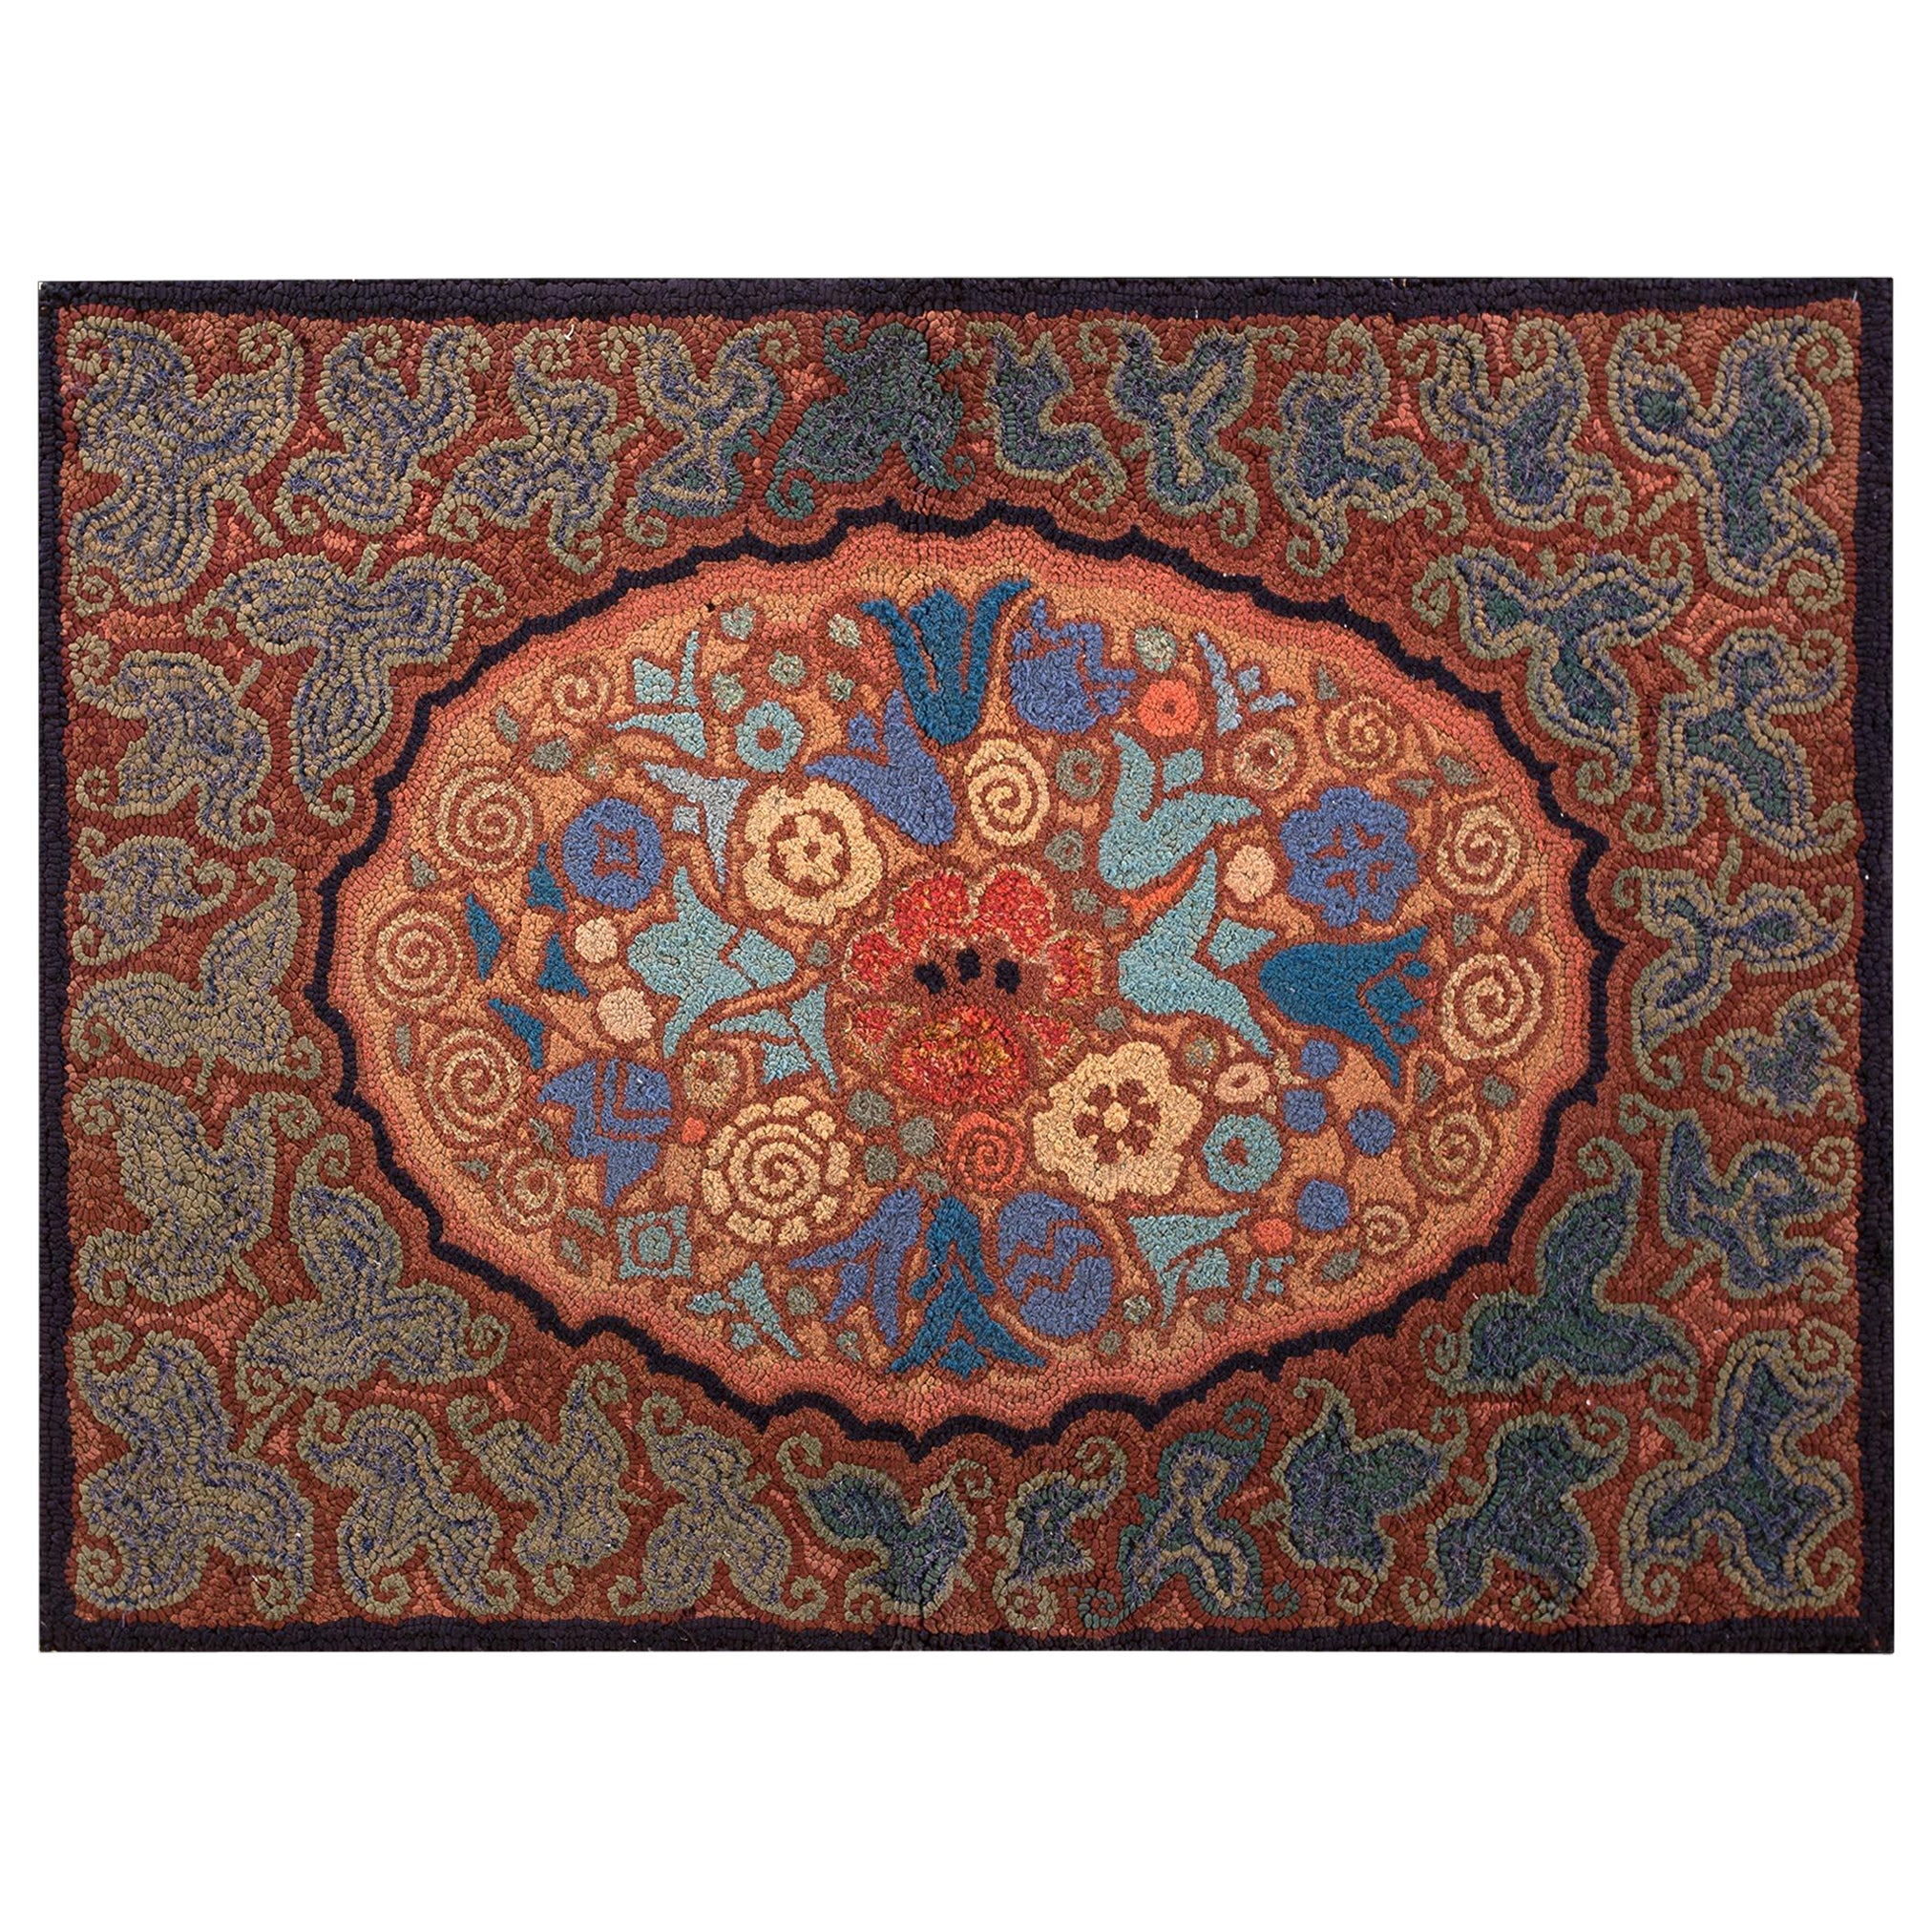 1920s American Hooked Rug ( 2'6" x 3'6" - 76 x 107 ) For Sale